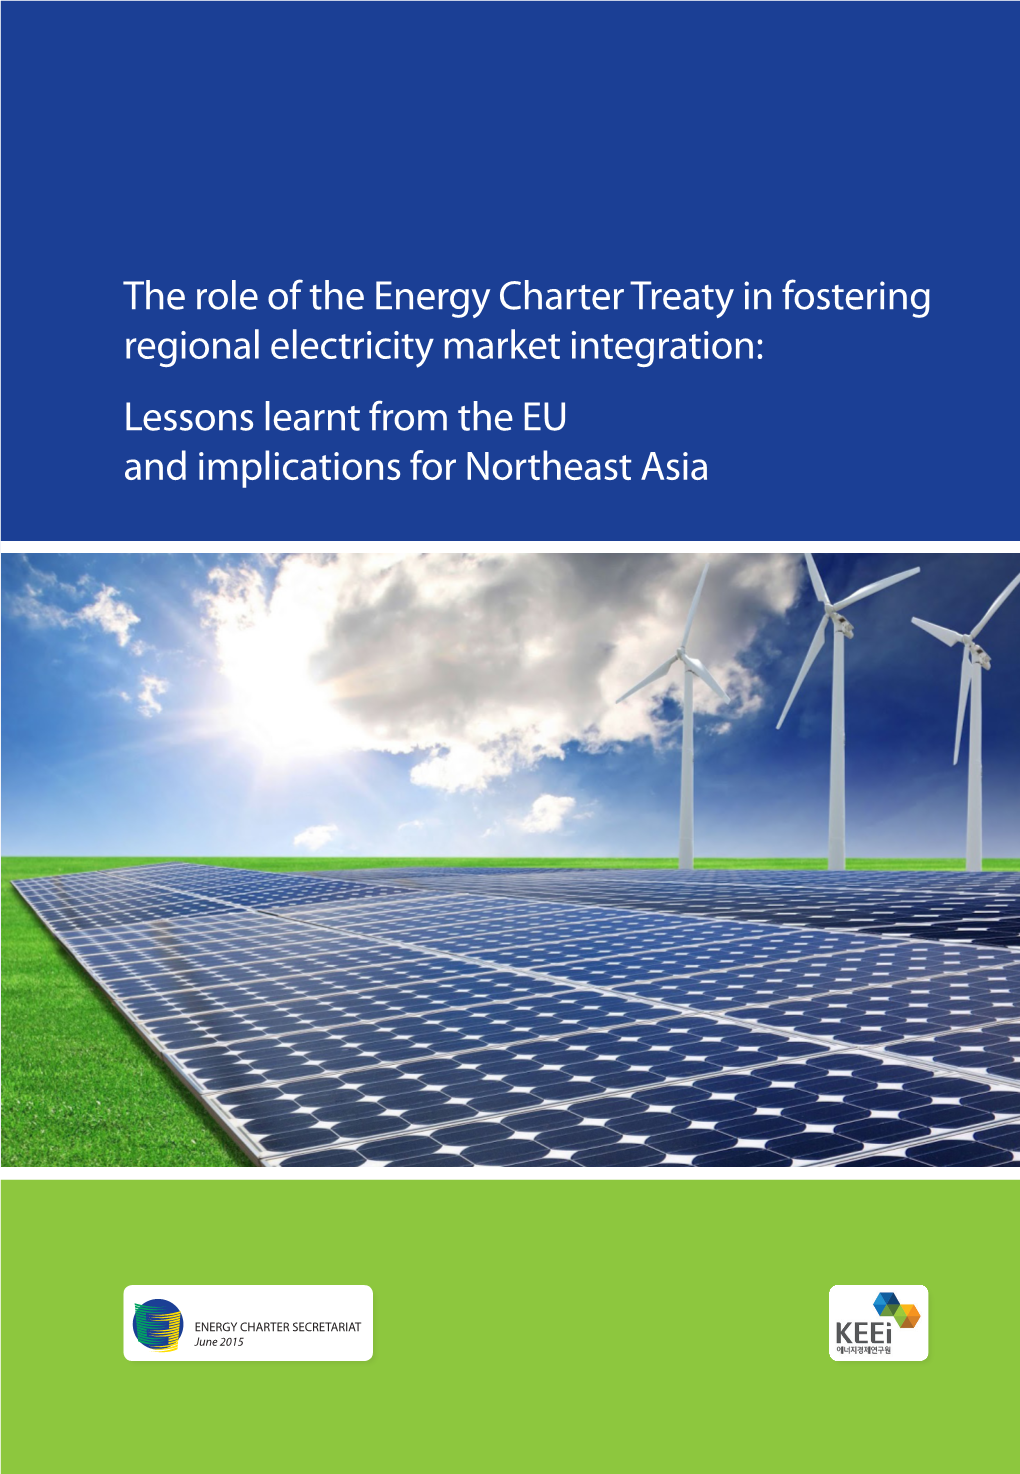 The Role of the Energy Charter Treaty in Fostering Regional Electricity Market Integration: Lessons Learnt from the EU and Implications for Northeast Asia